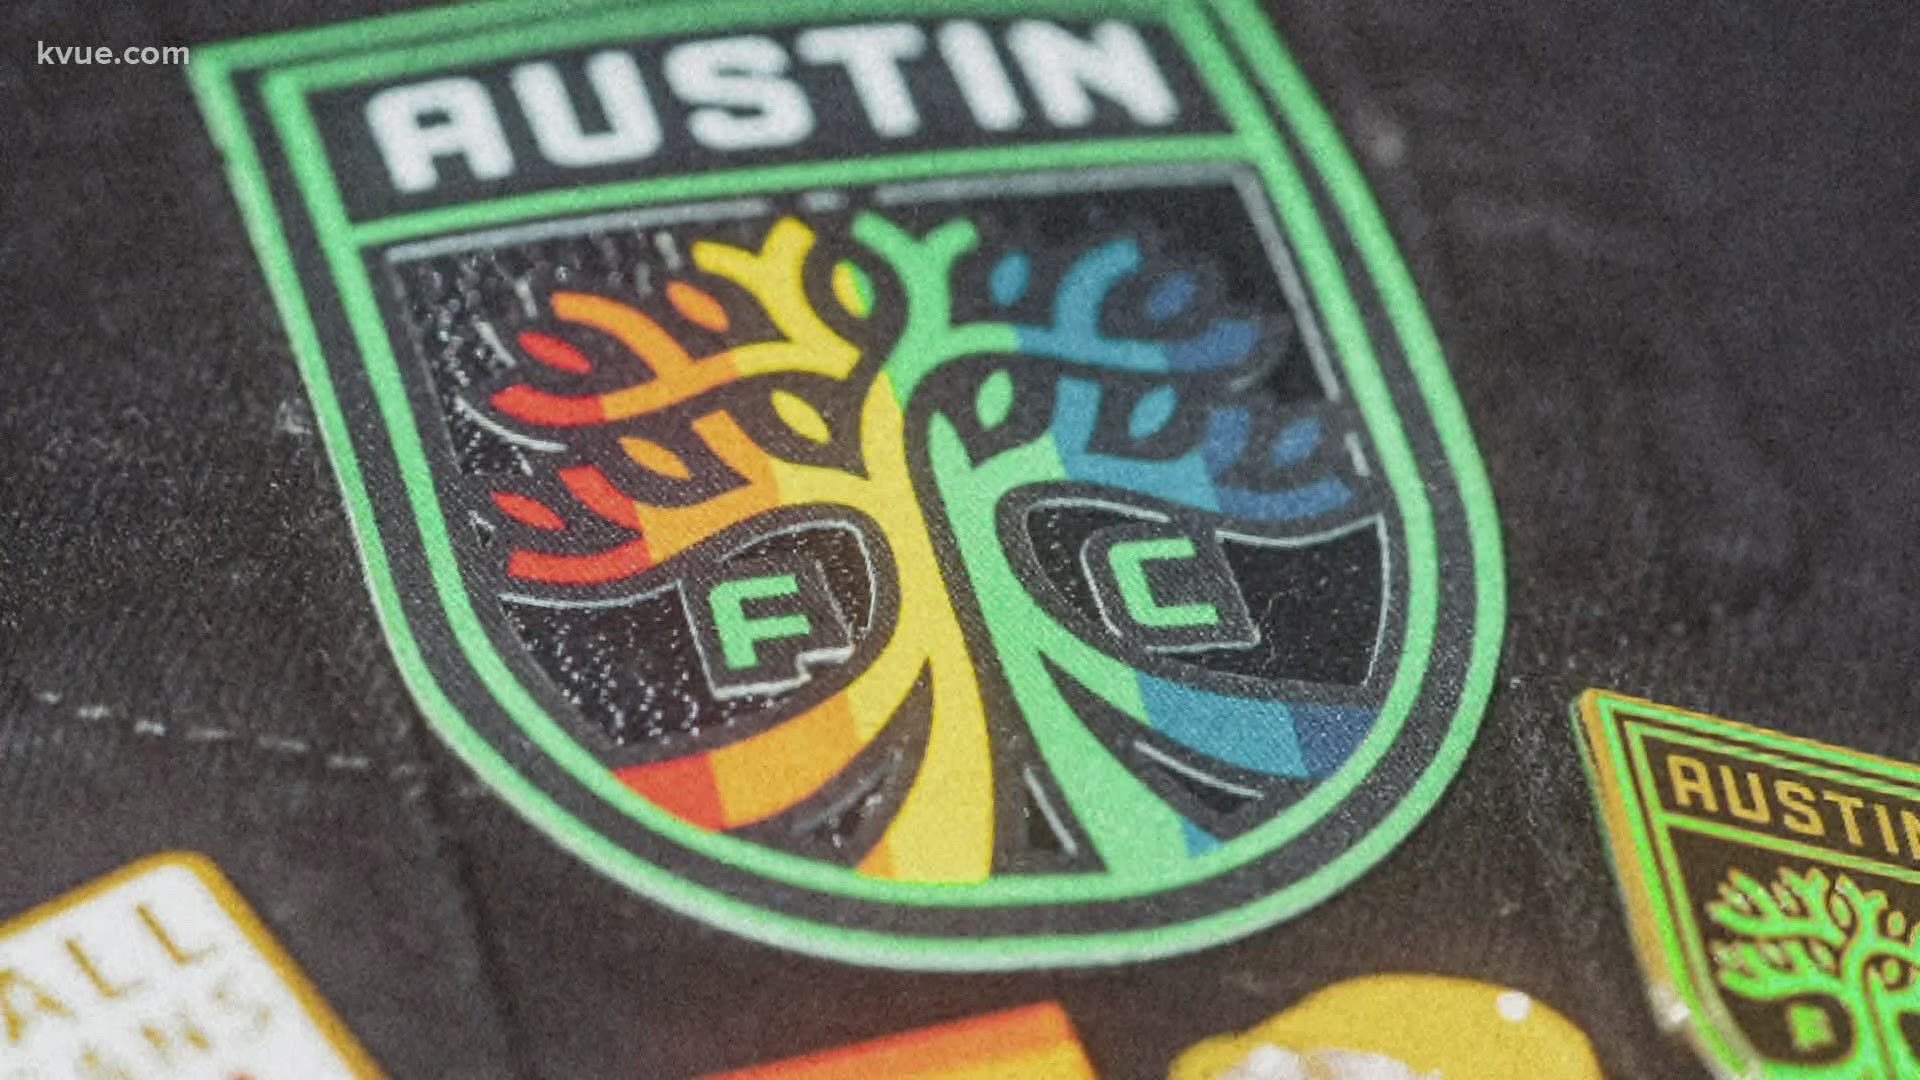 As part of the MLS "Soccer for All" week, Austin FC will sell a "Pride Patch" with proceeds benefitting the Austin LGBT Chamber of Commerce's education fund.